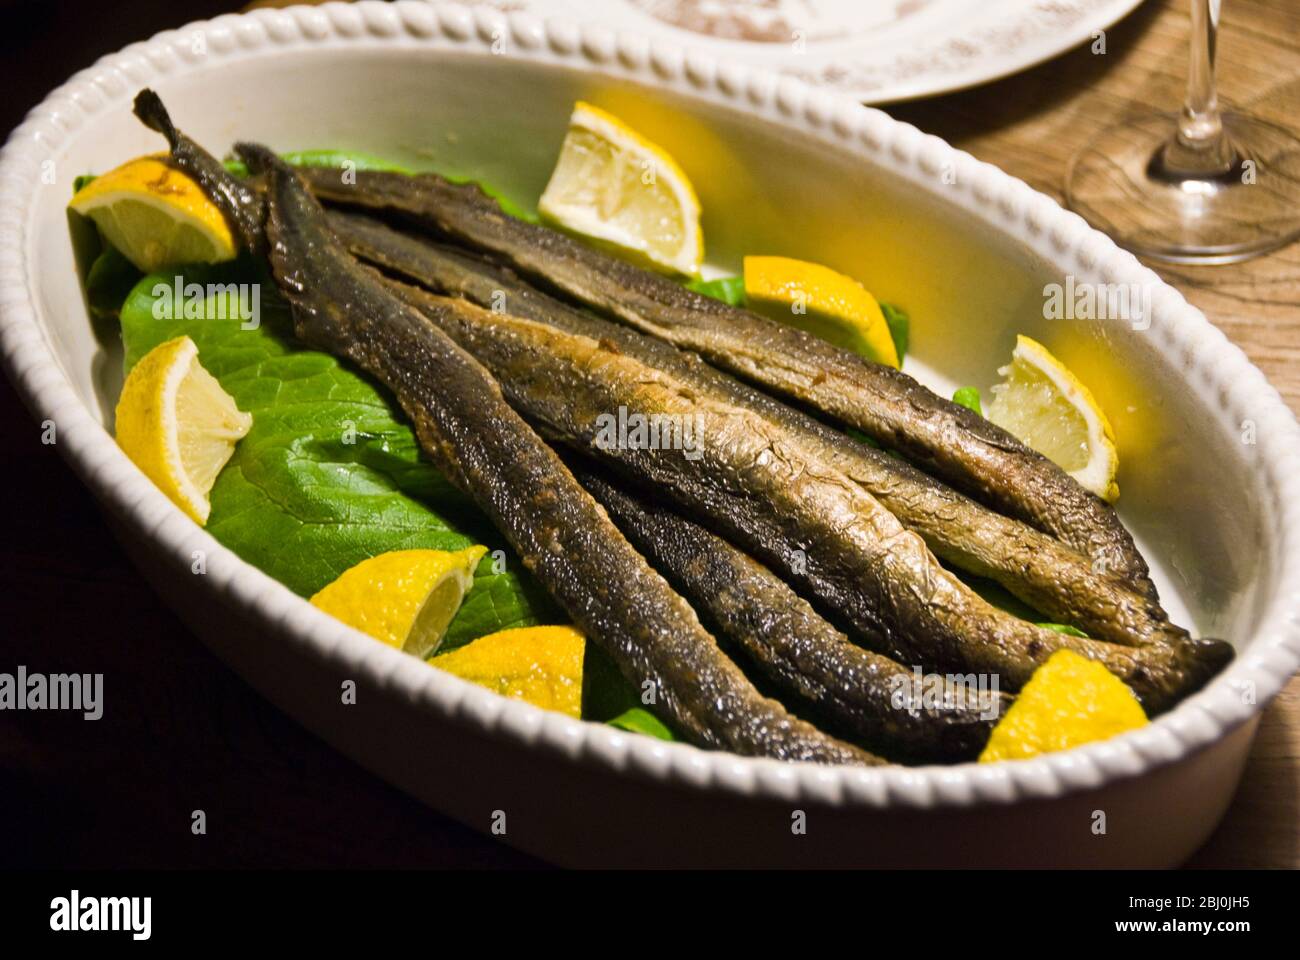 Lampreys from Finland served as a starter - Stock Photo